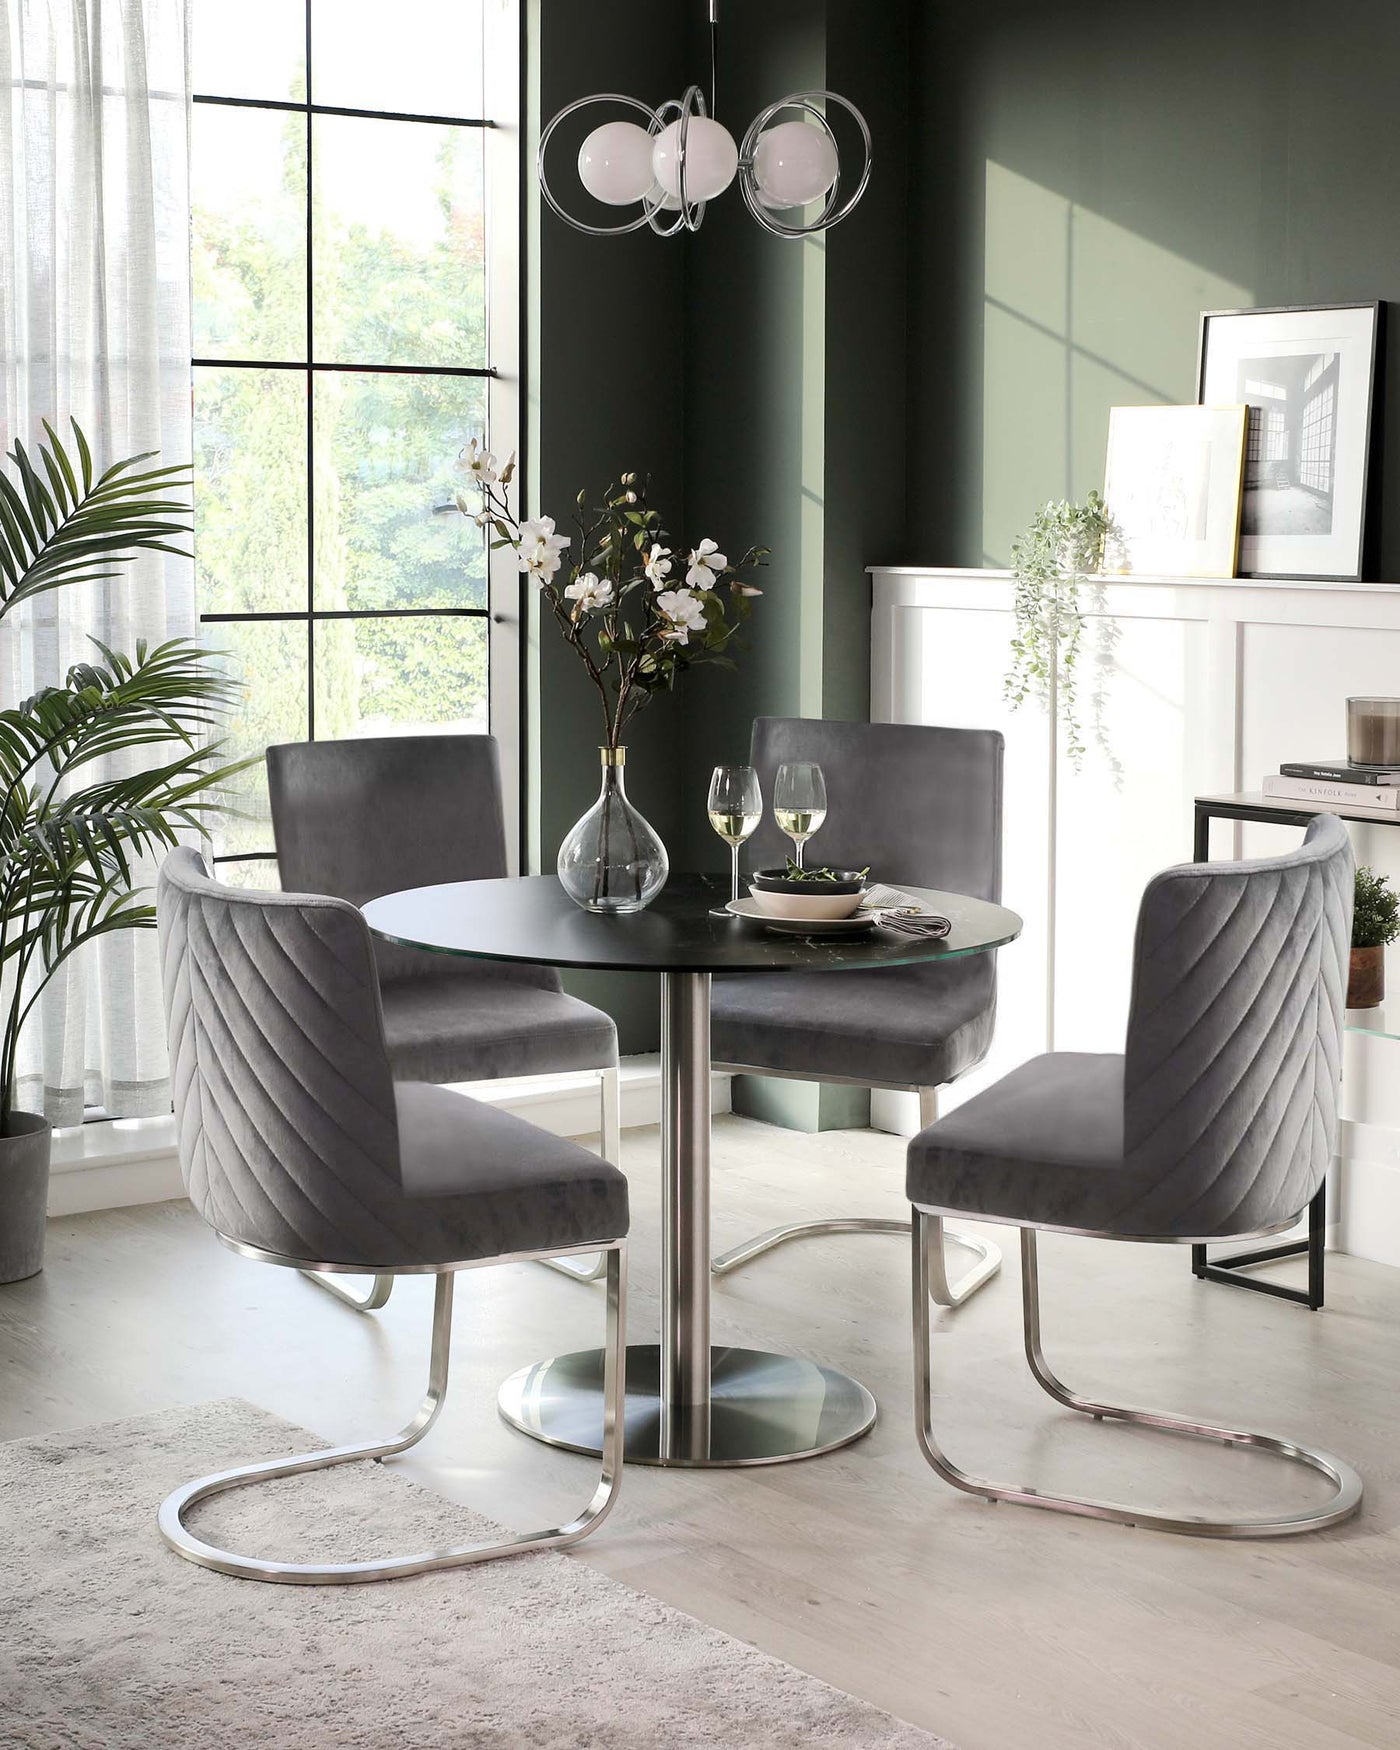 Romeo Black Marbled Ceramic and Polished Stainless Steel 4 Seater Dining Table